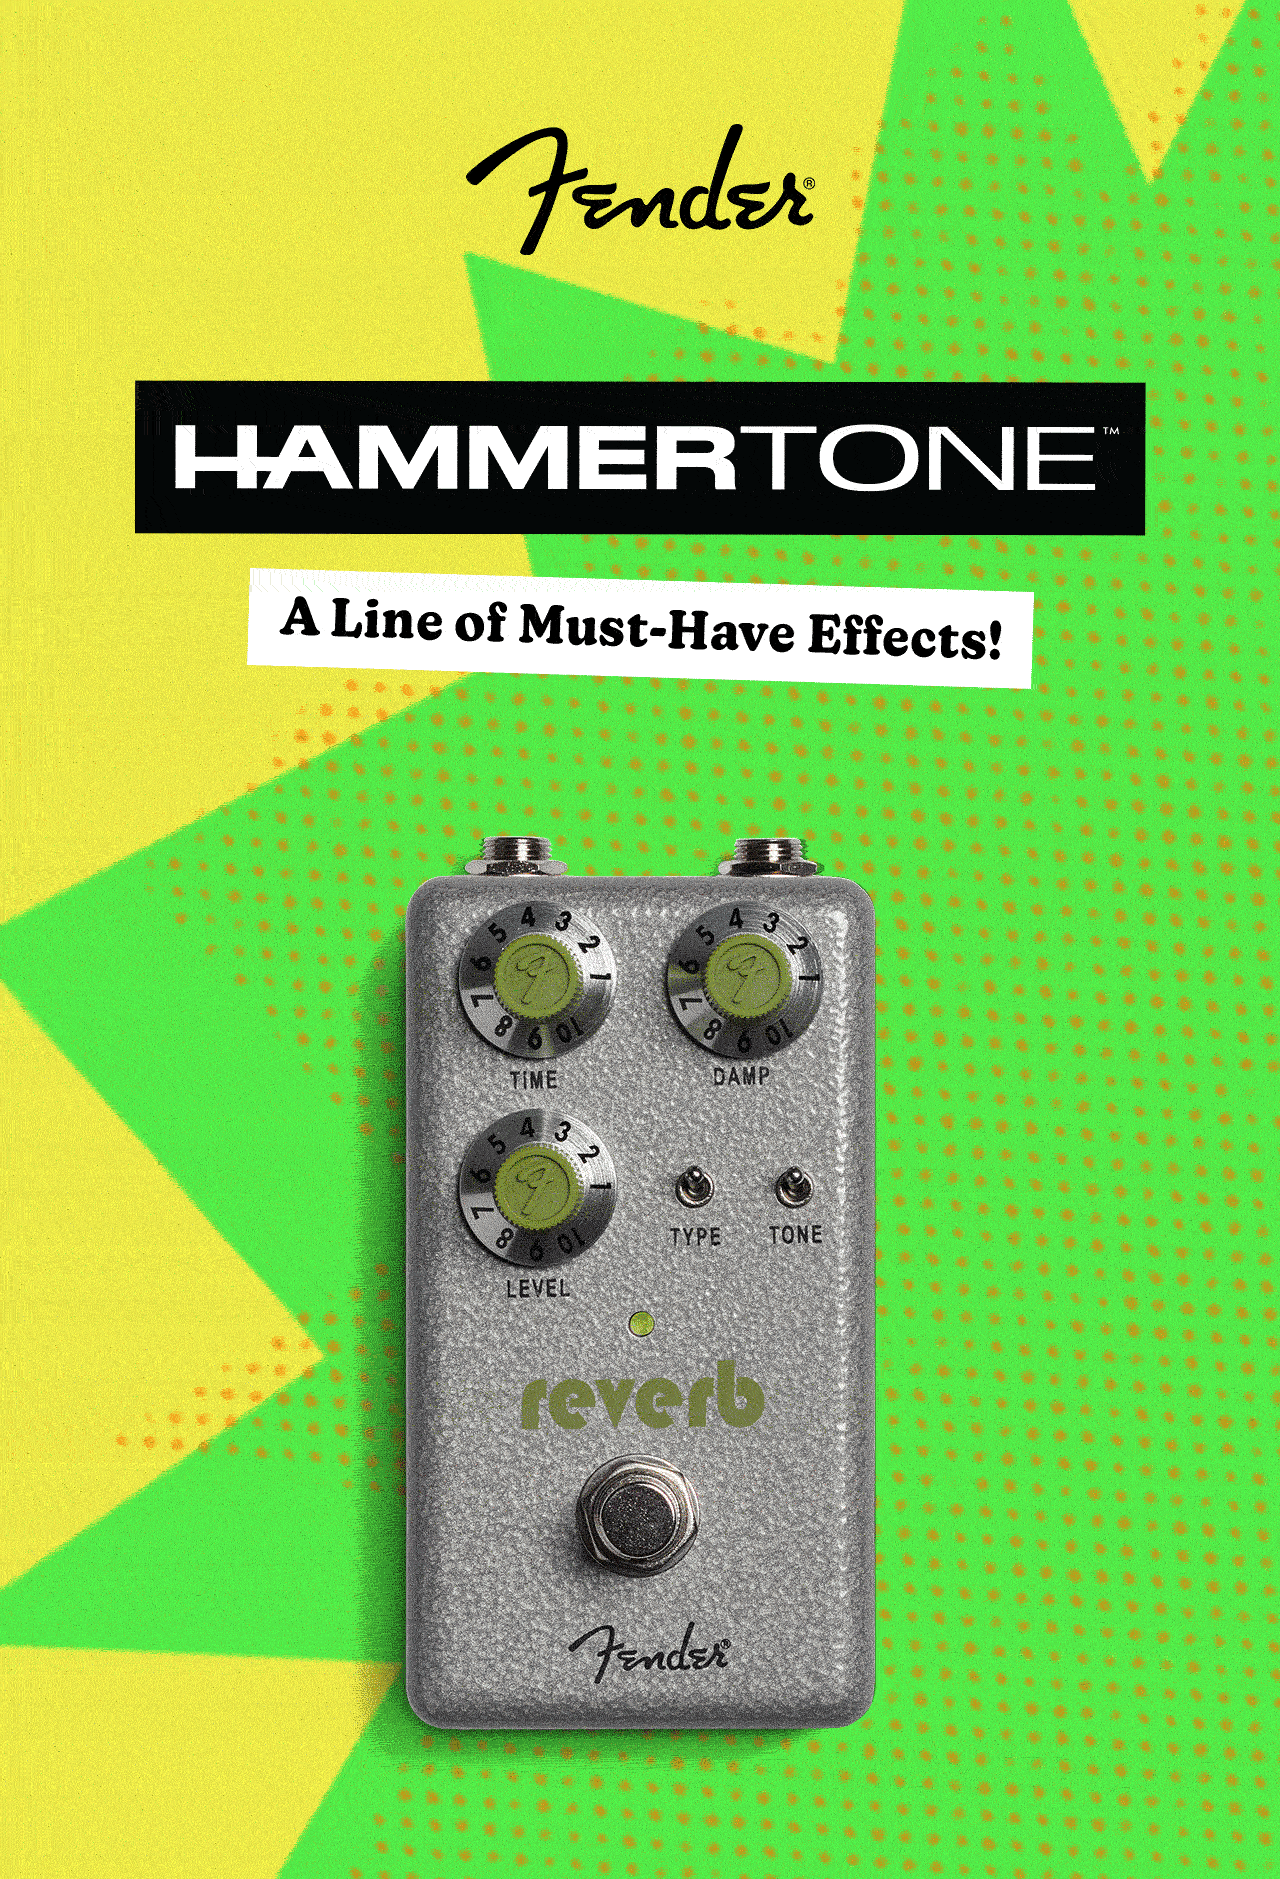 Hammertone | A Line of Must-Have Effects